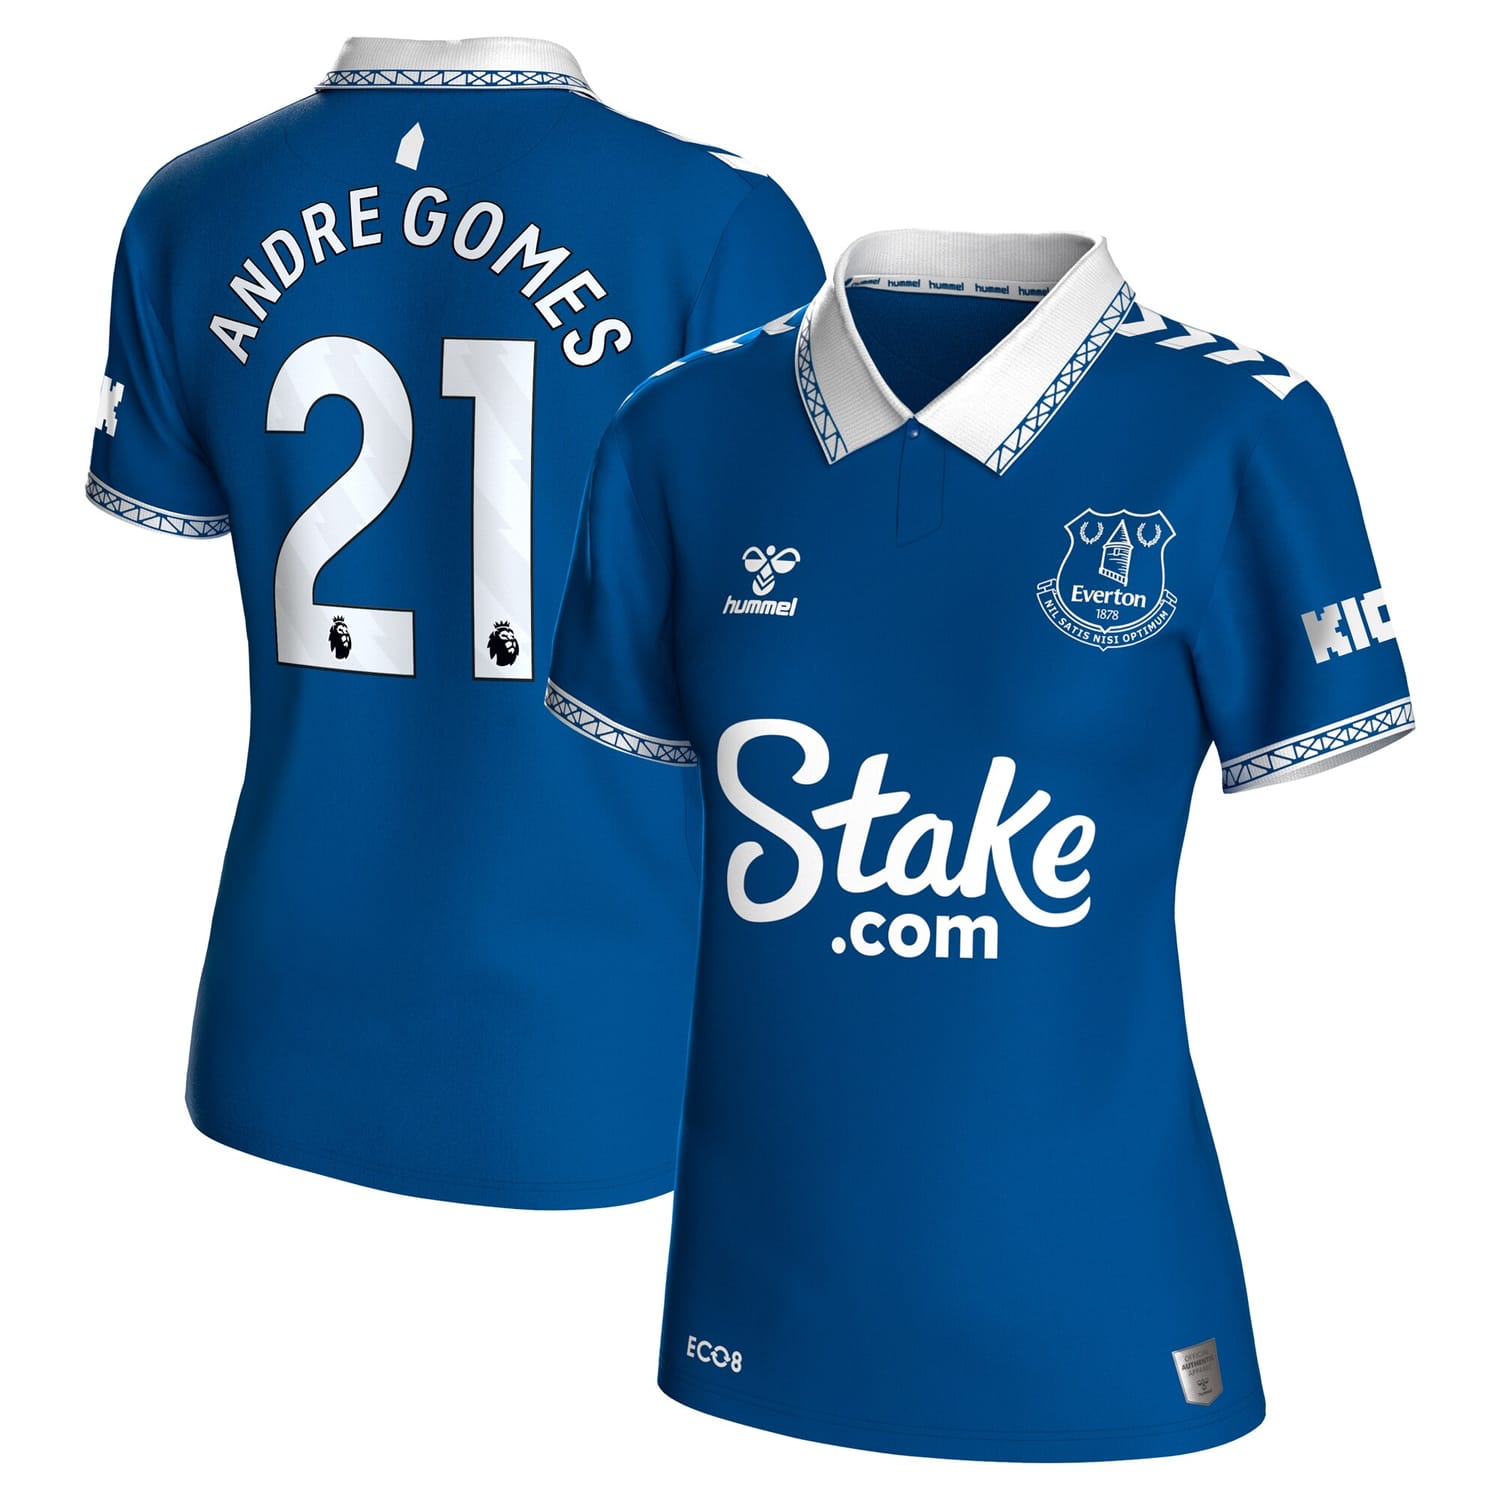 Premier League Everton Home Jersey Shirt 2023-24 player Andre Gomes 21 printing for Women